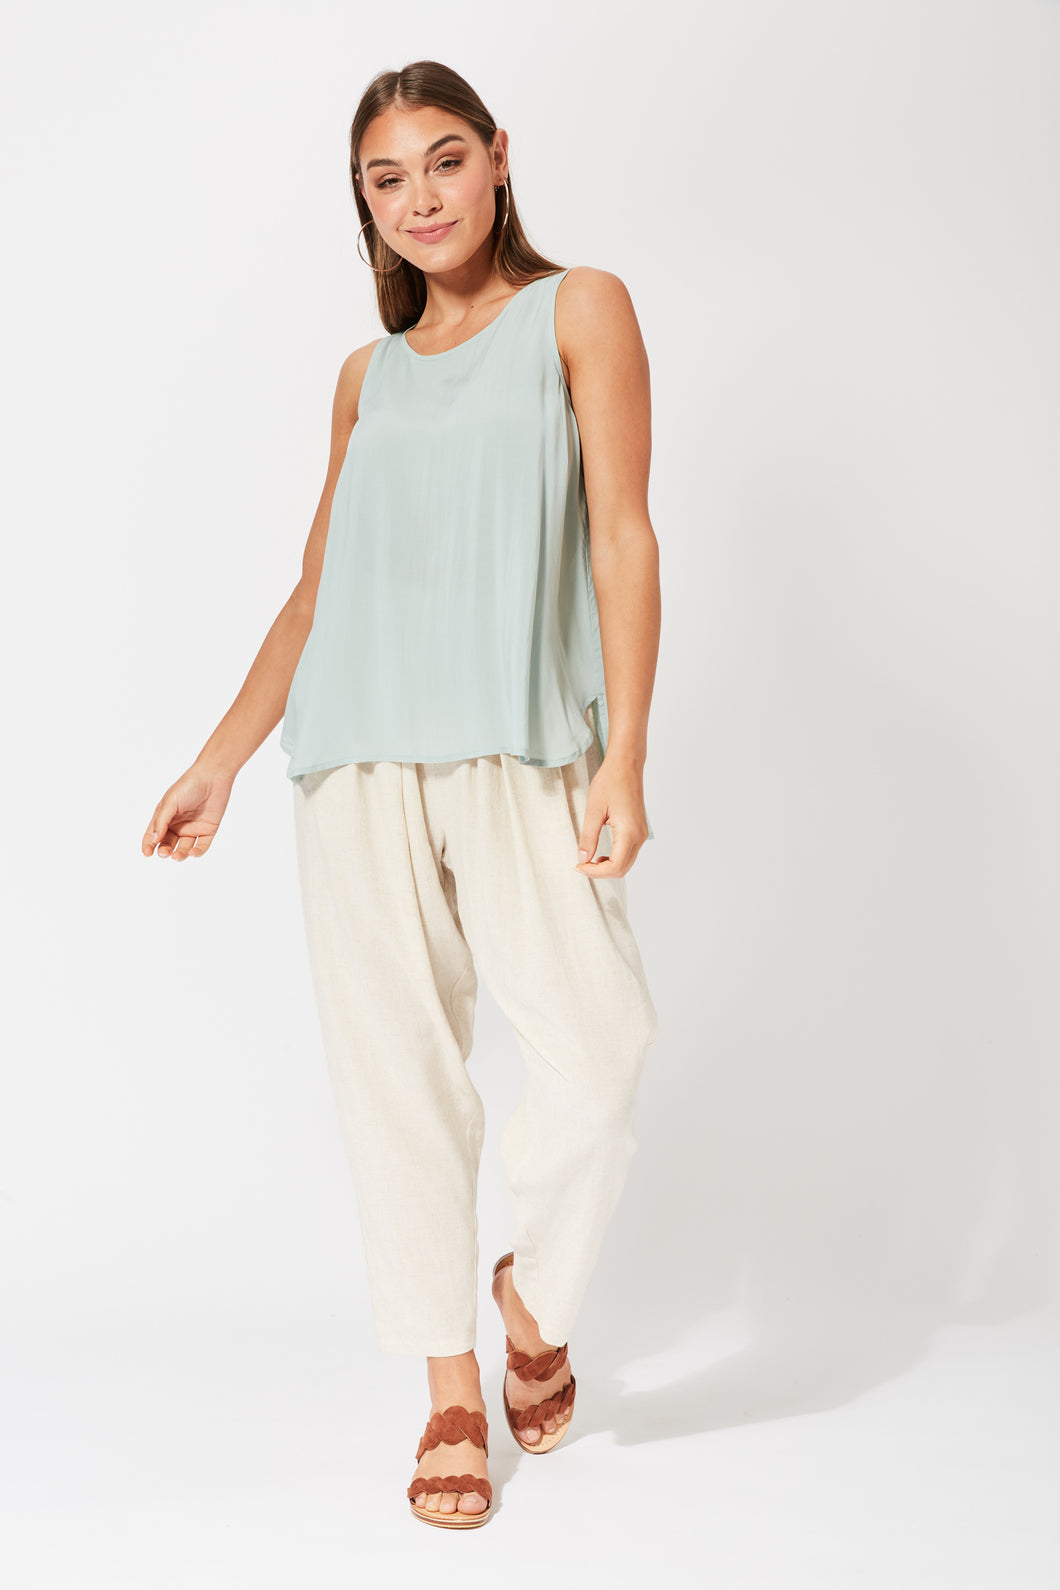 Haven - Saba Tank Top in Mineral